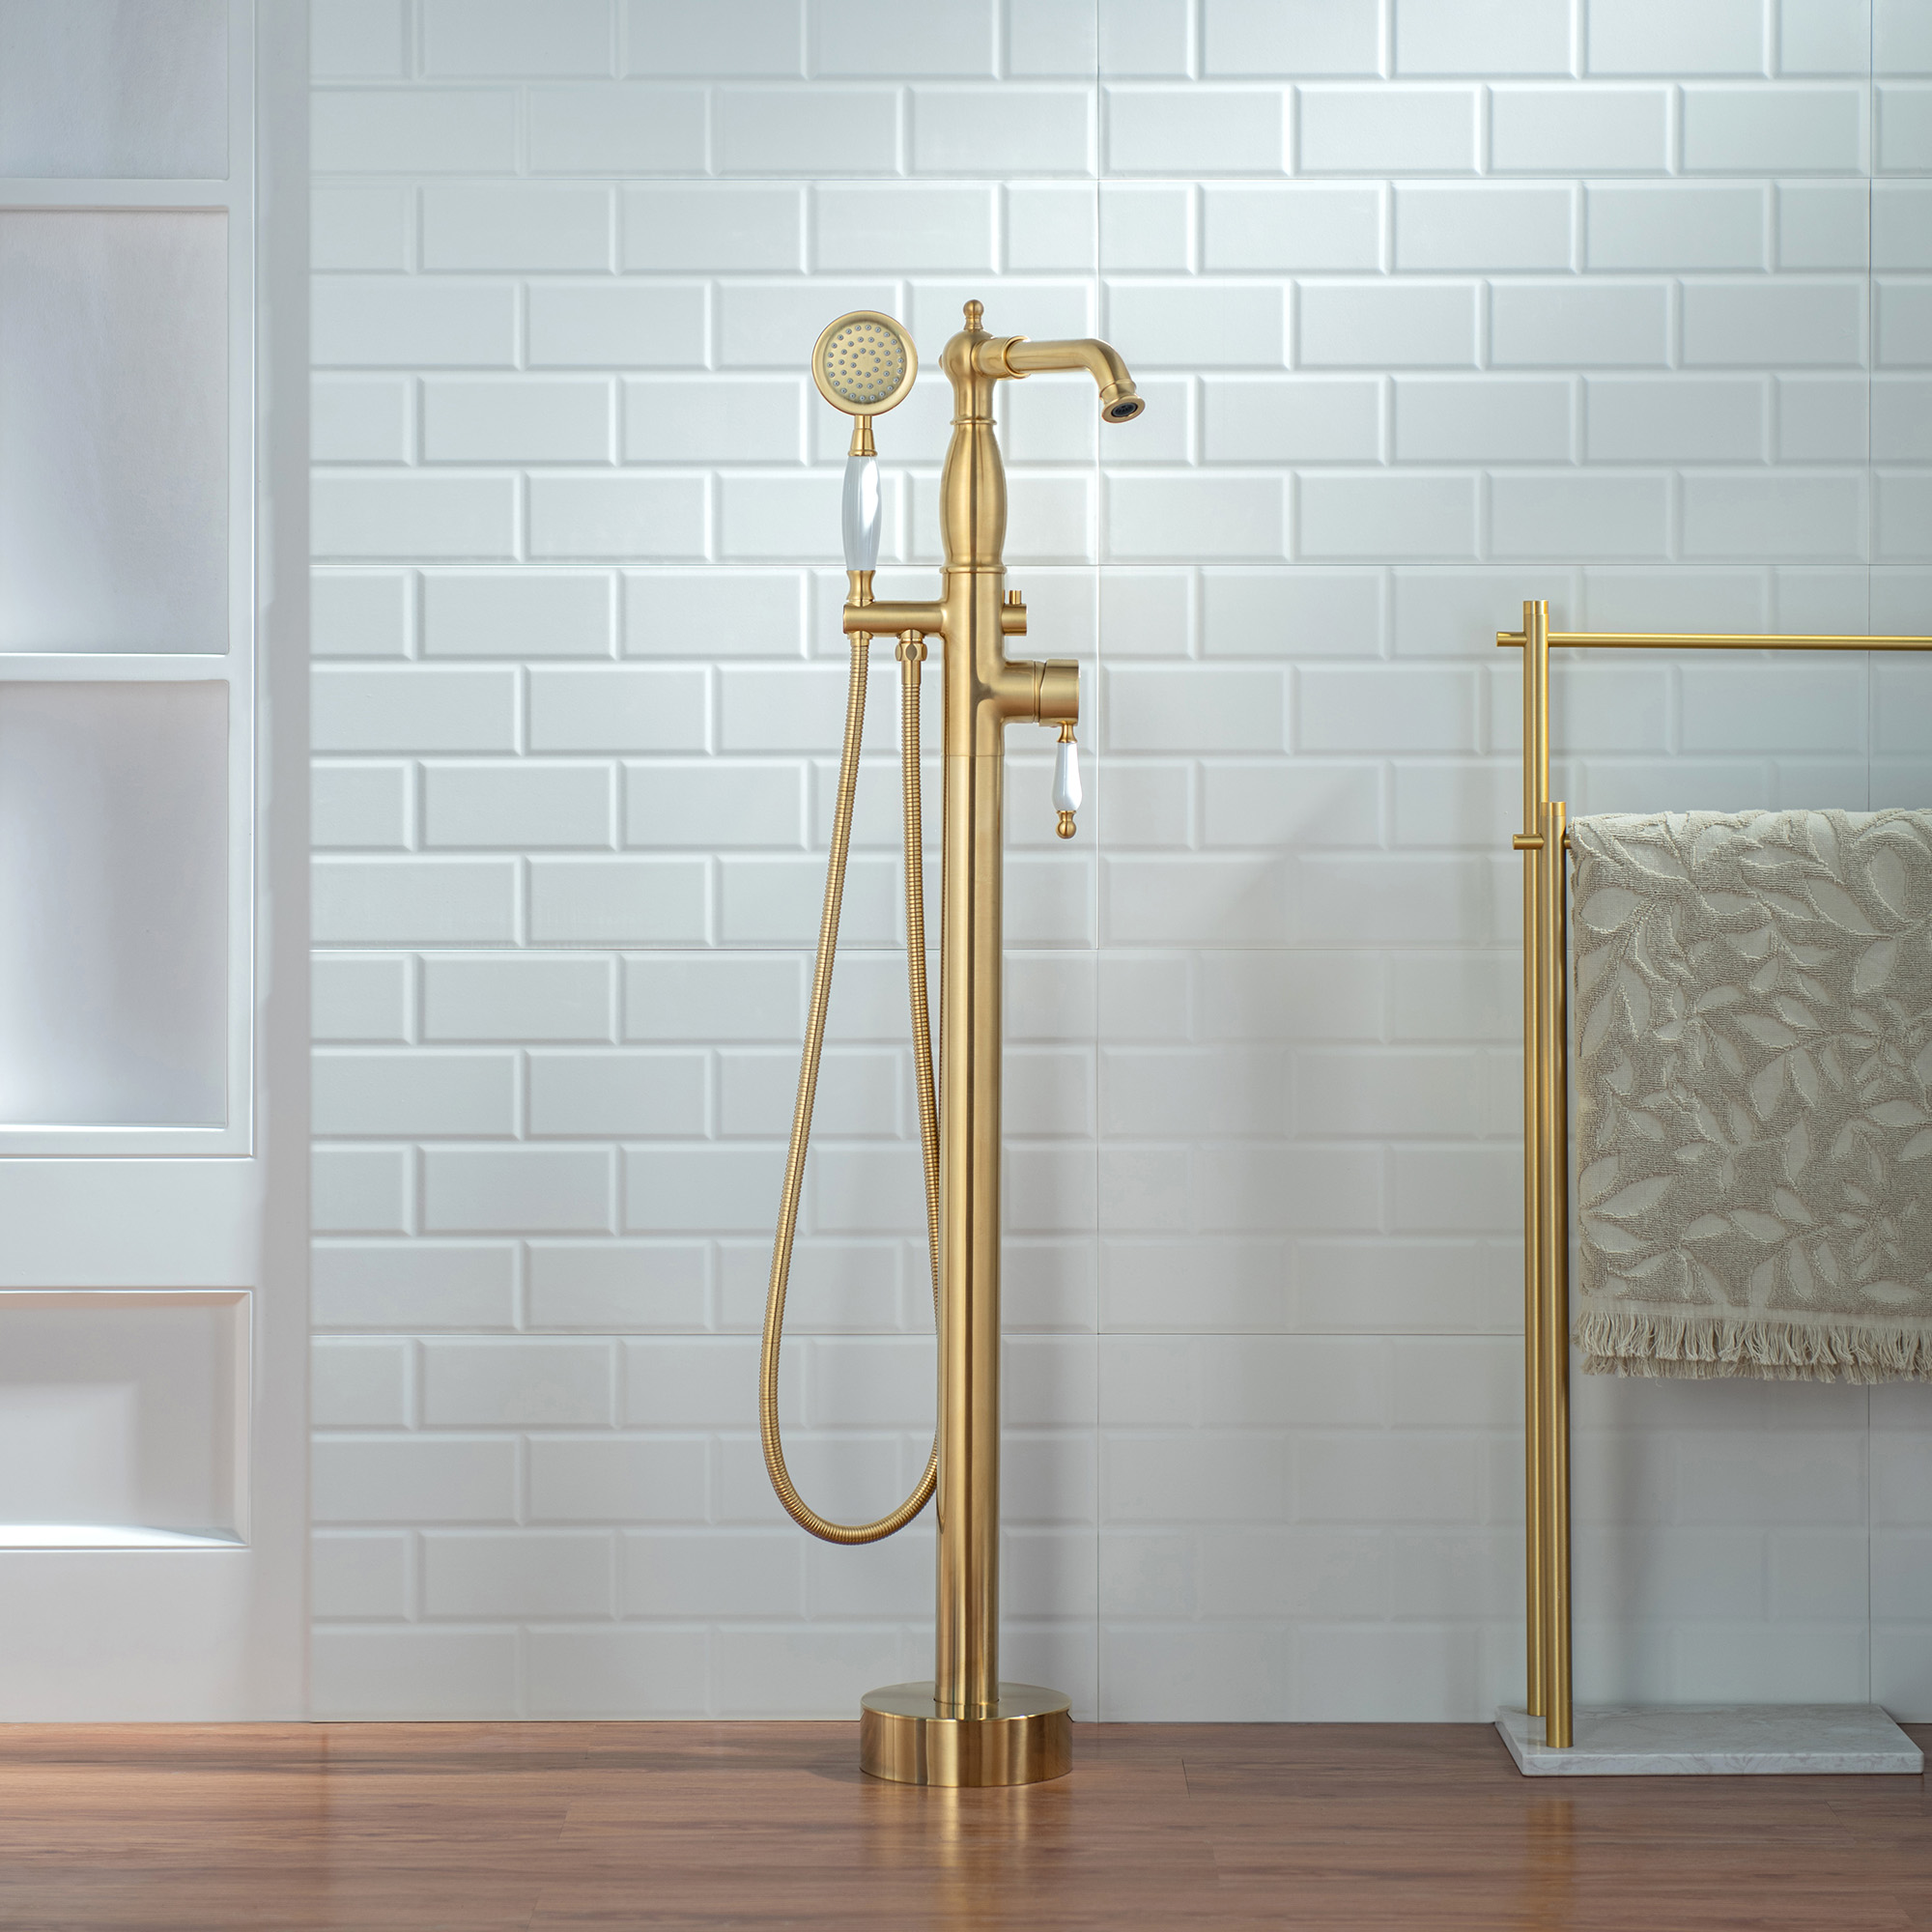 WOODBRIDGE F0050BG Fusion Single Handle Floor Mount Freestanding Tub Filler Faucet with Telephone Hand shower in Polished Gold Finis